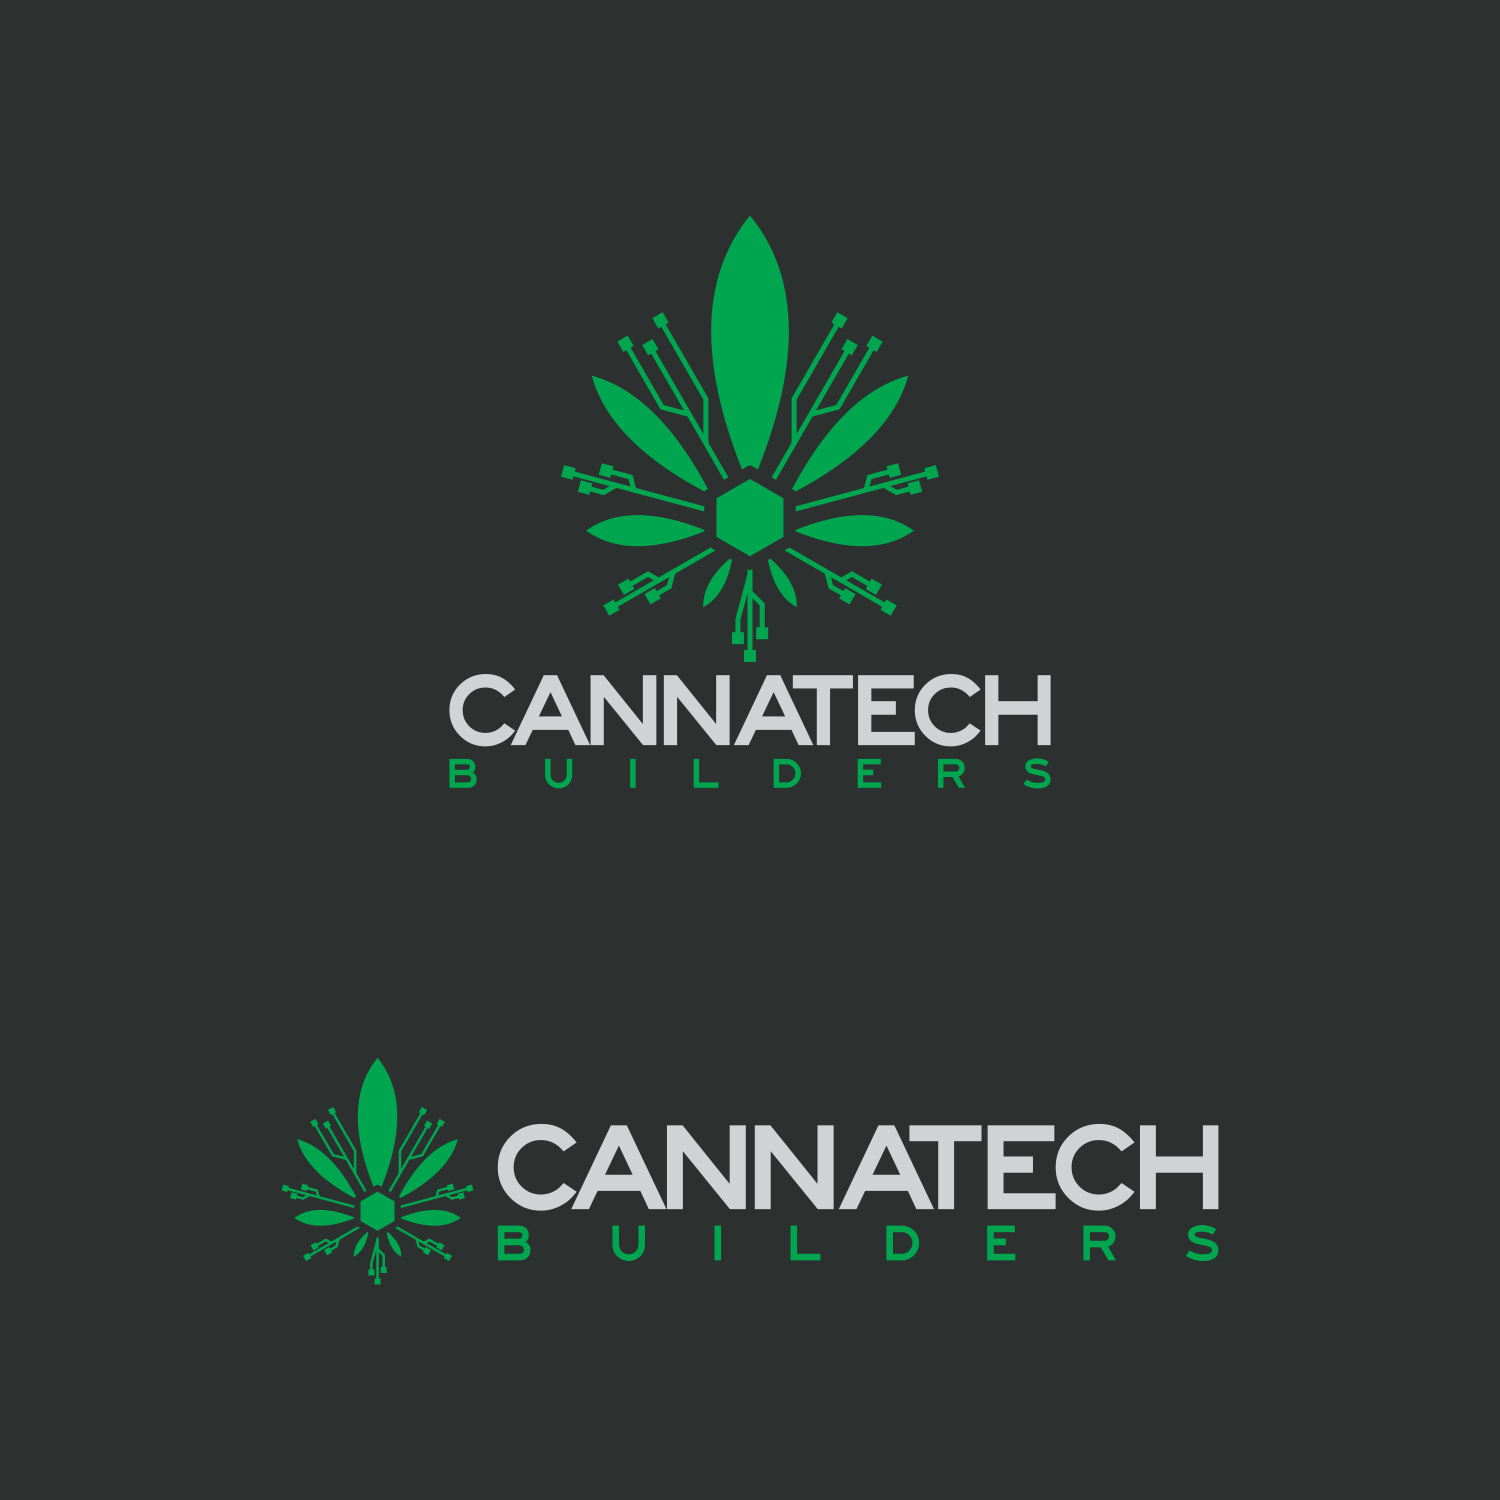 Weed Logo - 45 Marijuana and Weed Logo Designs for Branding Your Cannabis Business